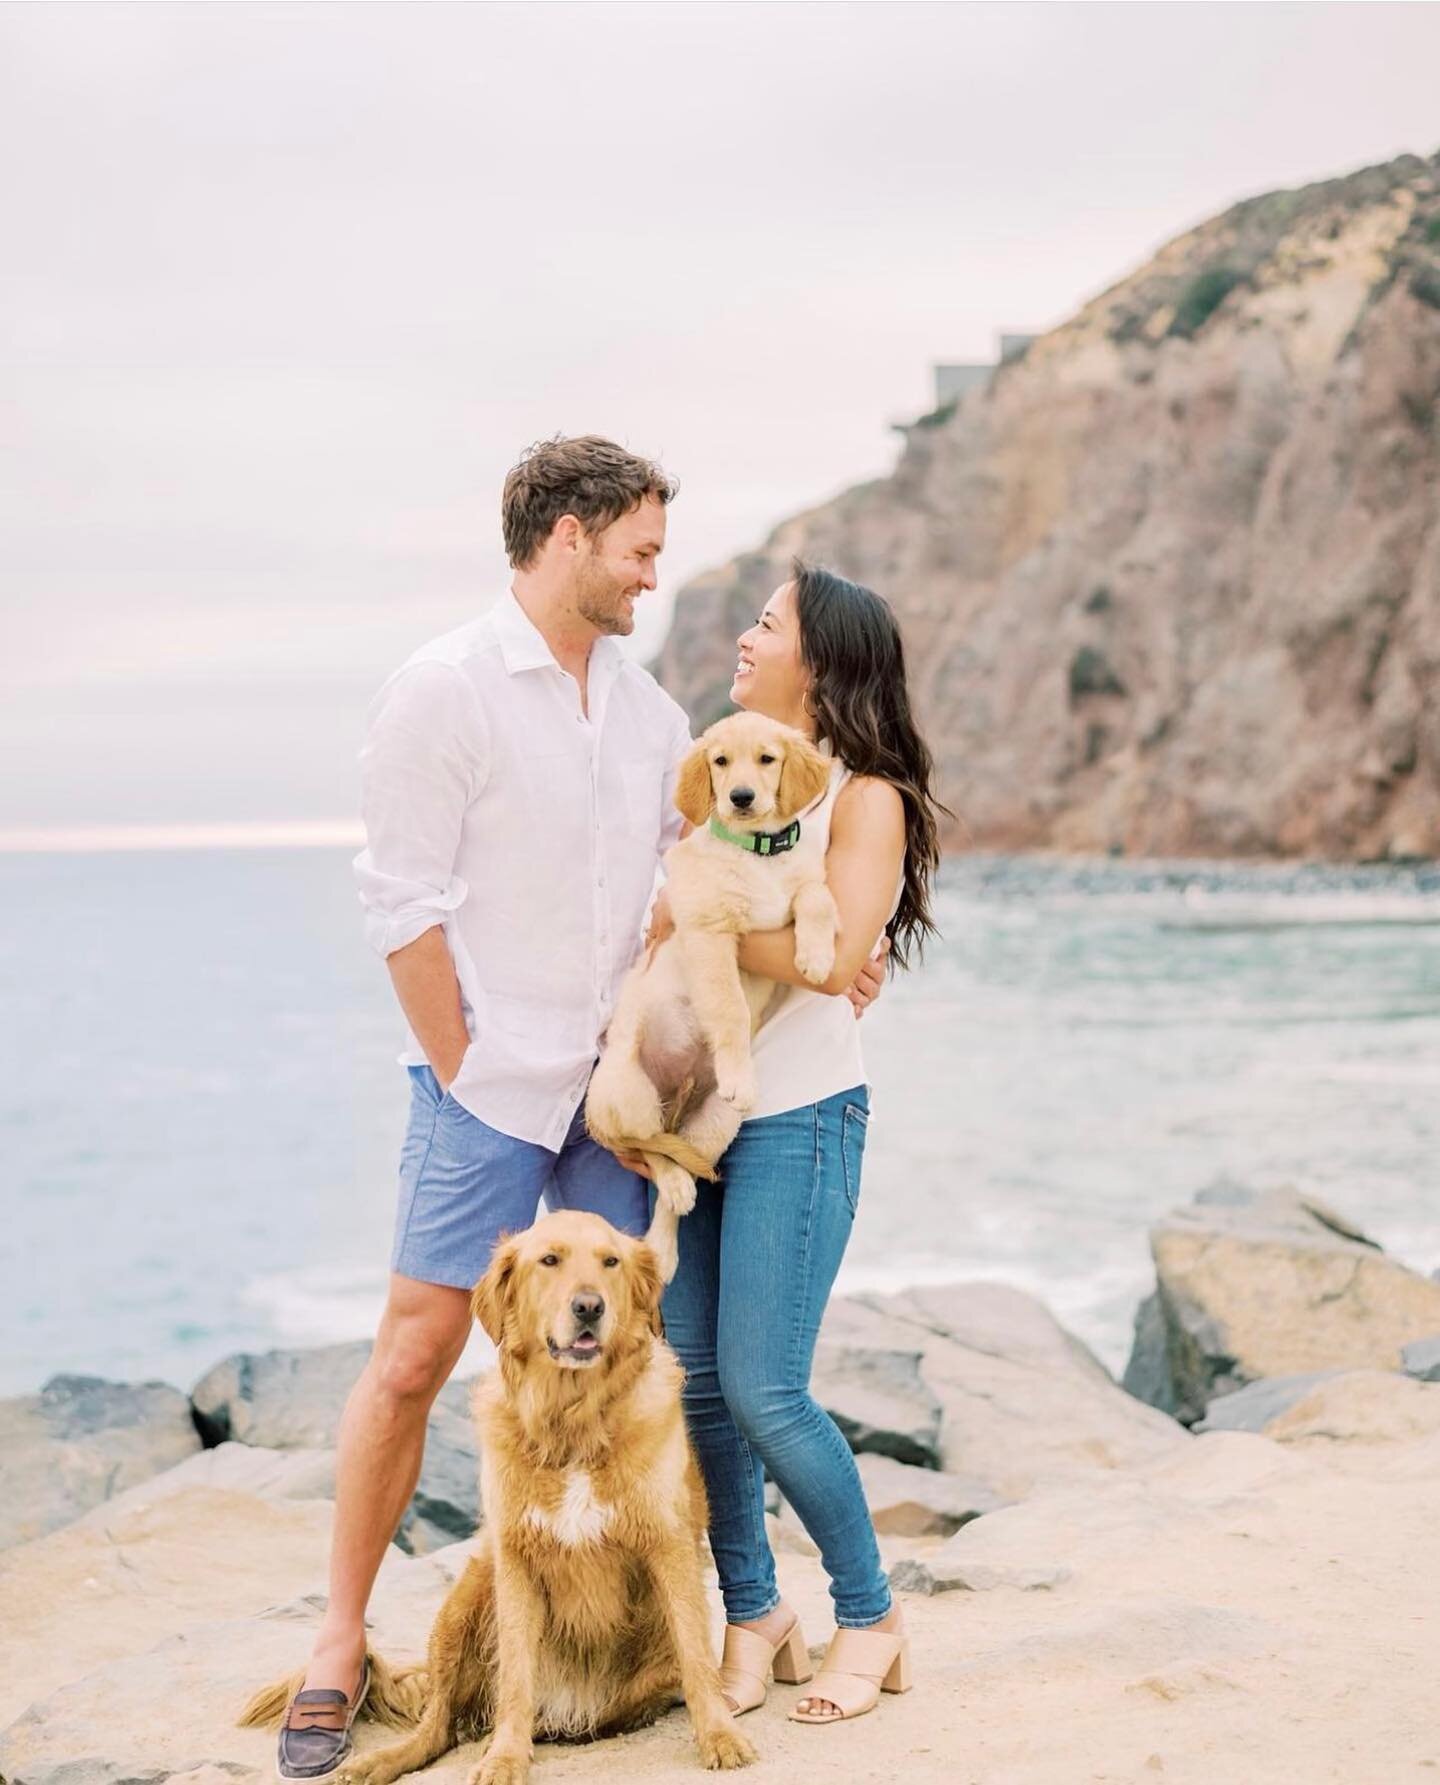 We are beyond excited to celebrate the upcoming wedding weekend of these two amazing people and their furry kids Daisy and Scout!! It&rsquo;s going to be beautiful!! @amyttran @chaptiti @alisonbrynn_photography @idoweddingsandevents @scrippsseasidefo